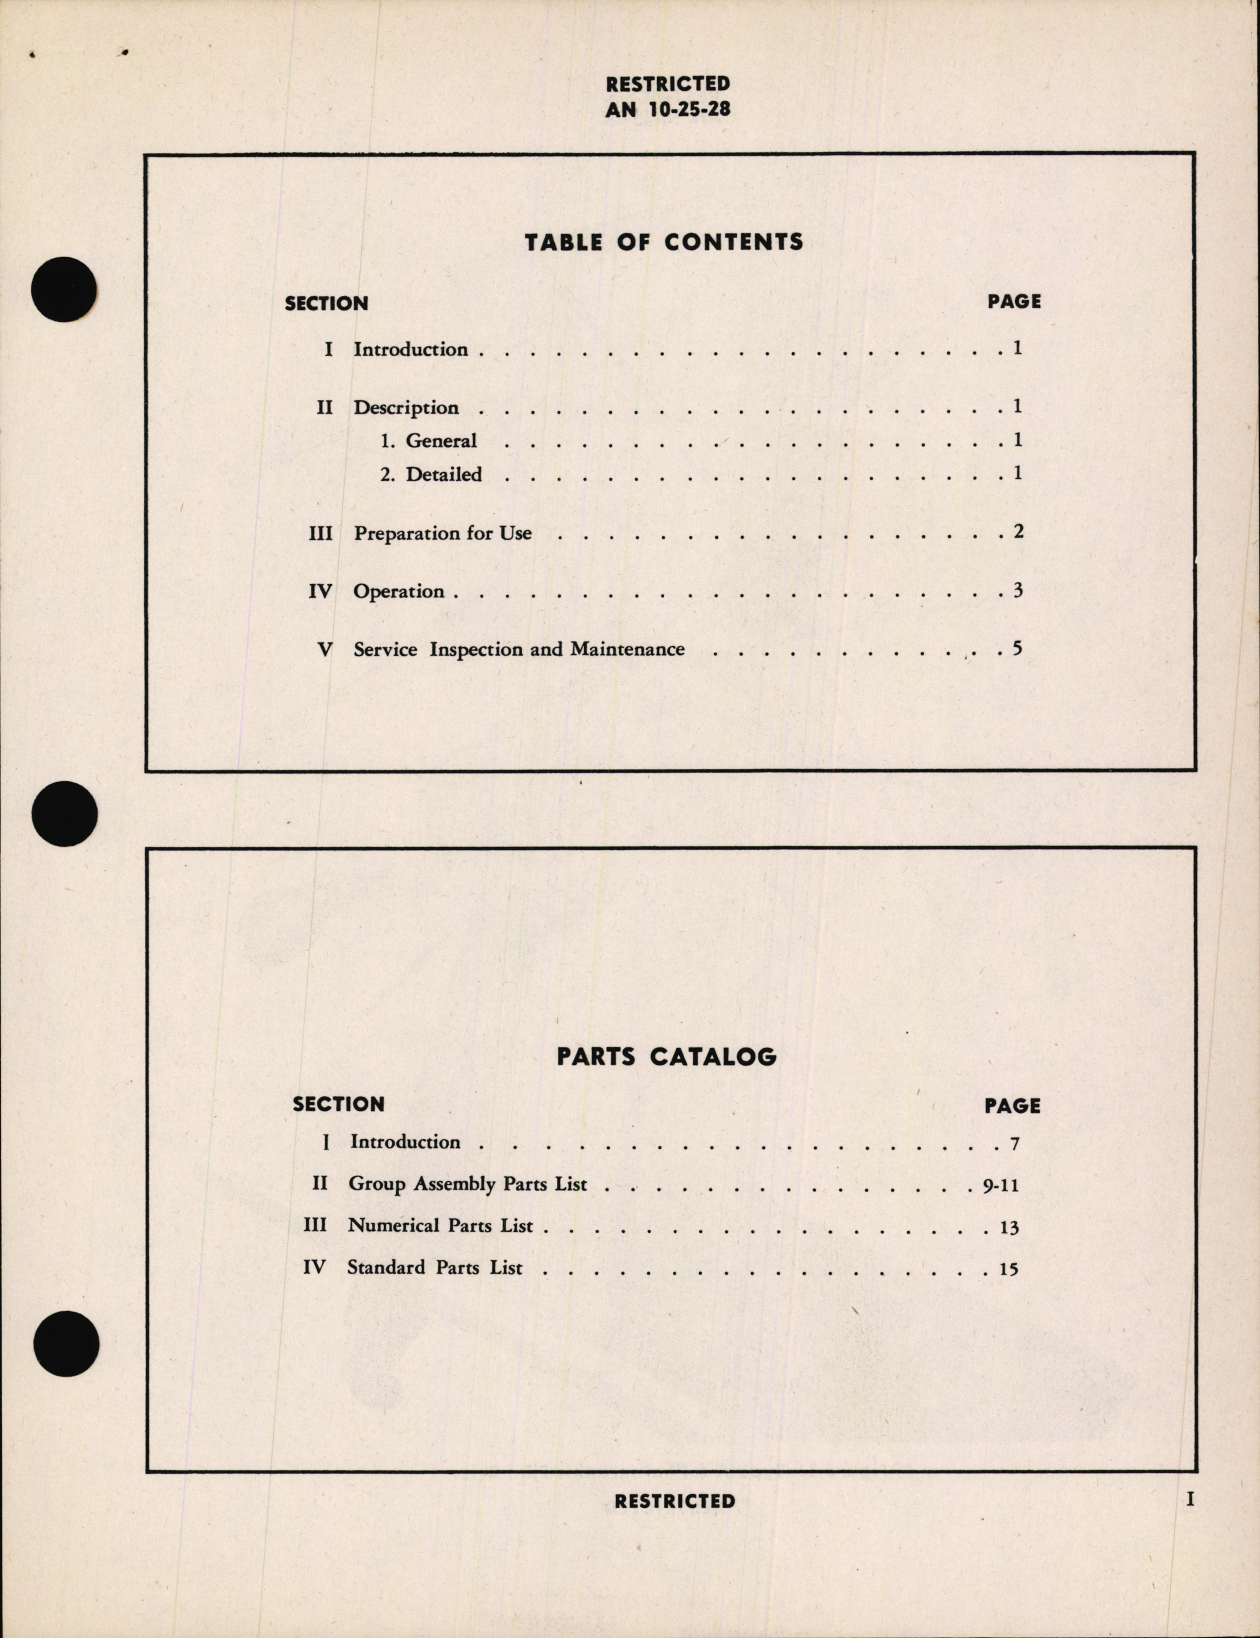 Sample page 5 from AirCorps Library document: Handbook of Operation and Service Instructions with Parts Catalog for Type A-8 Photographic Film Dryer